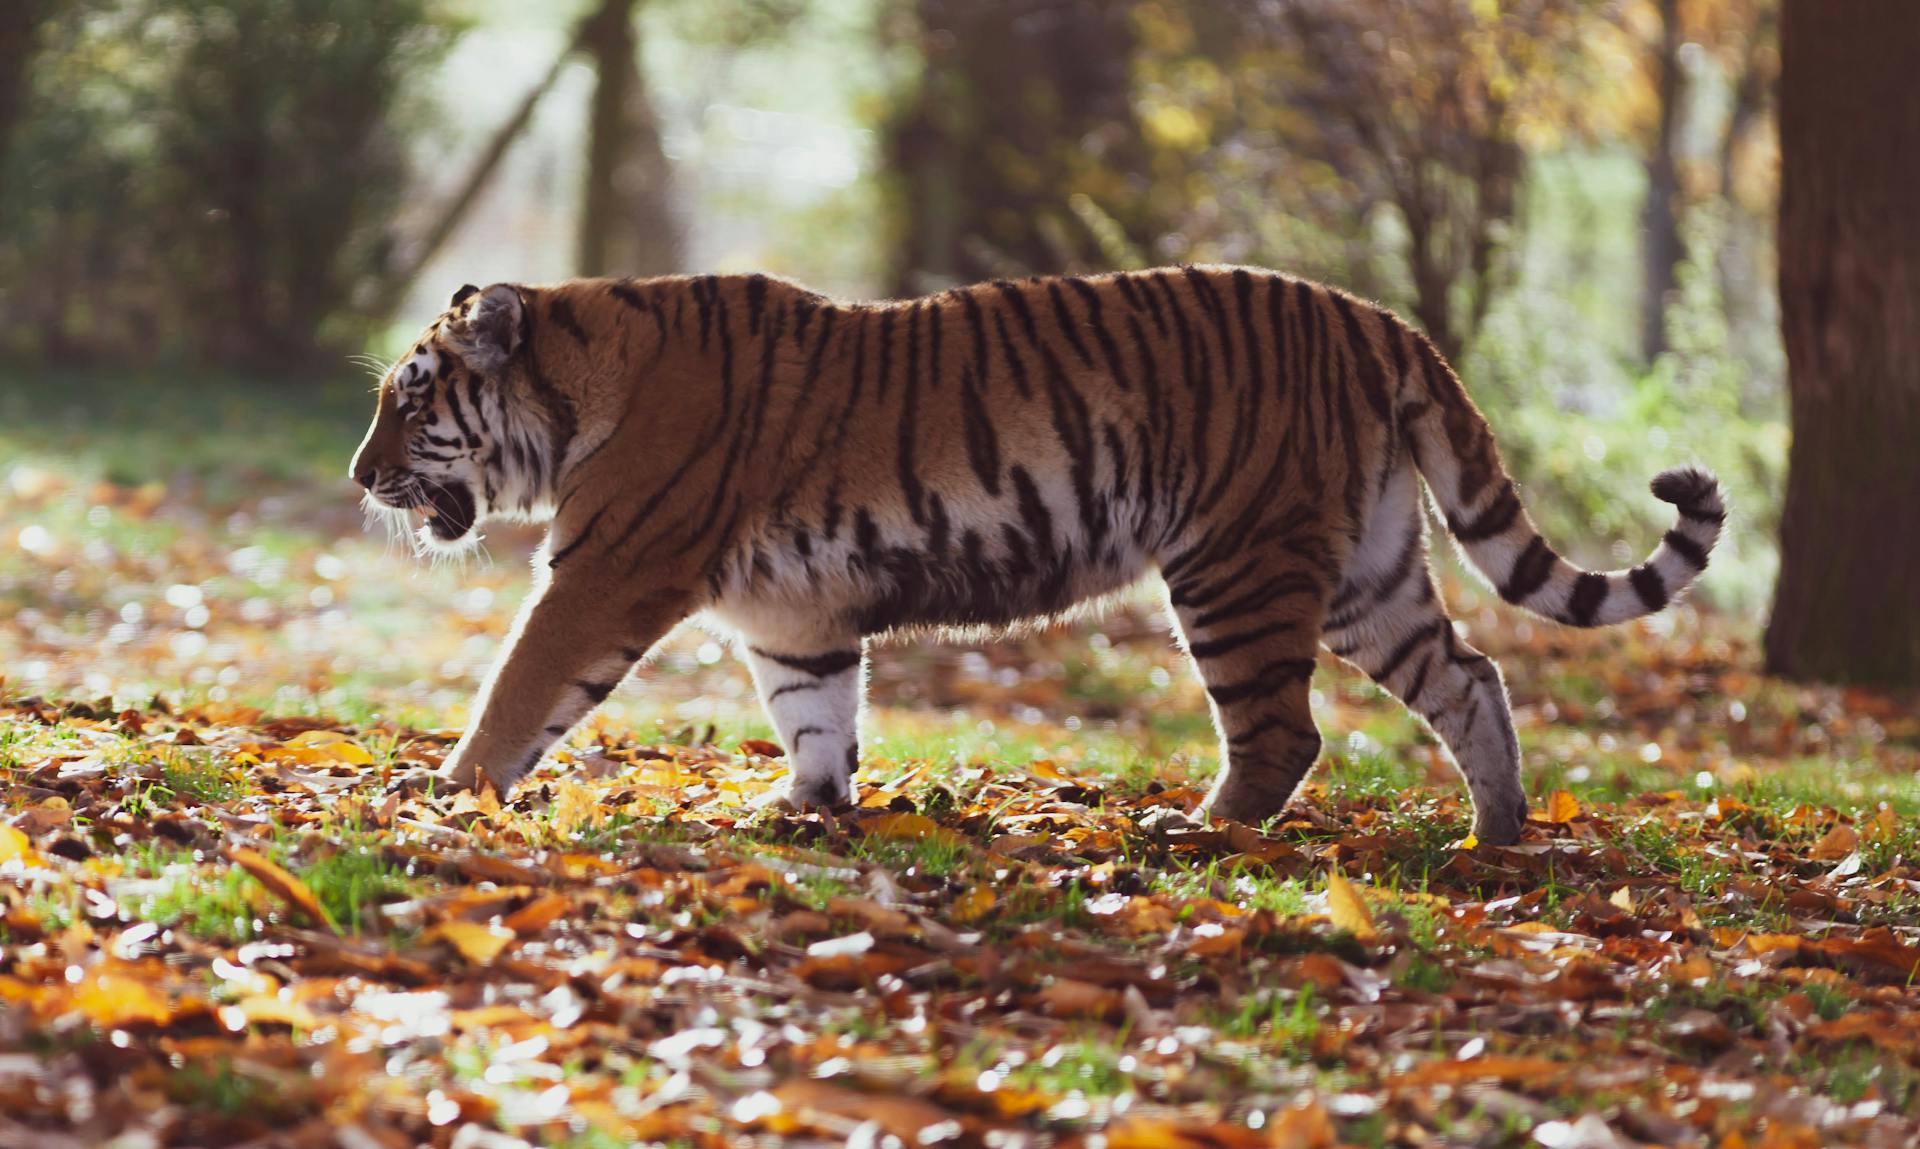 Gray and Black Tiger Walking on Forest